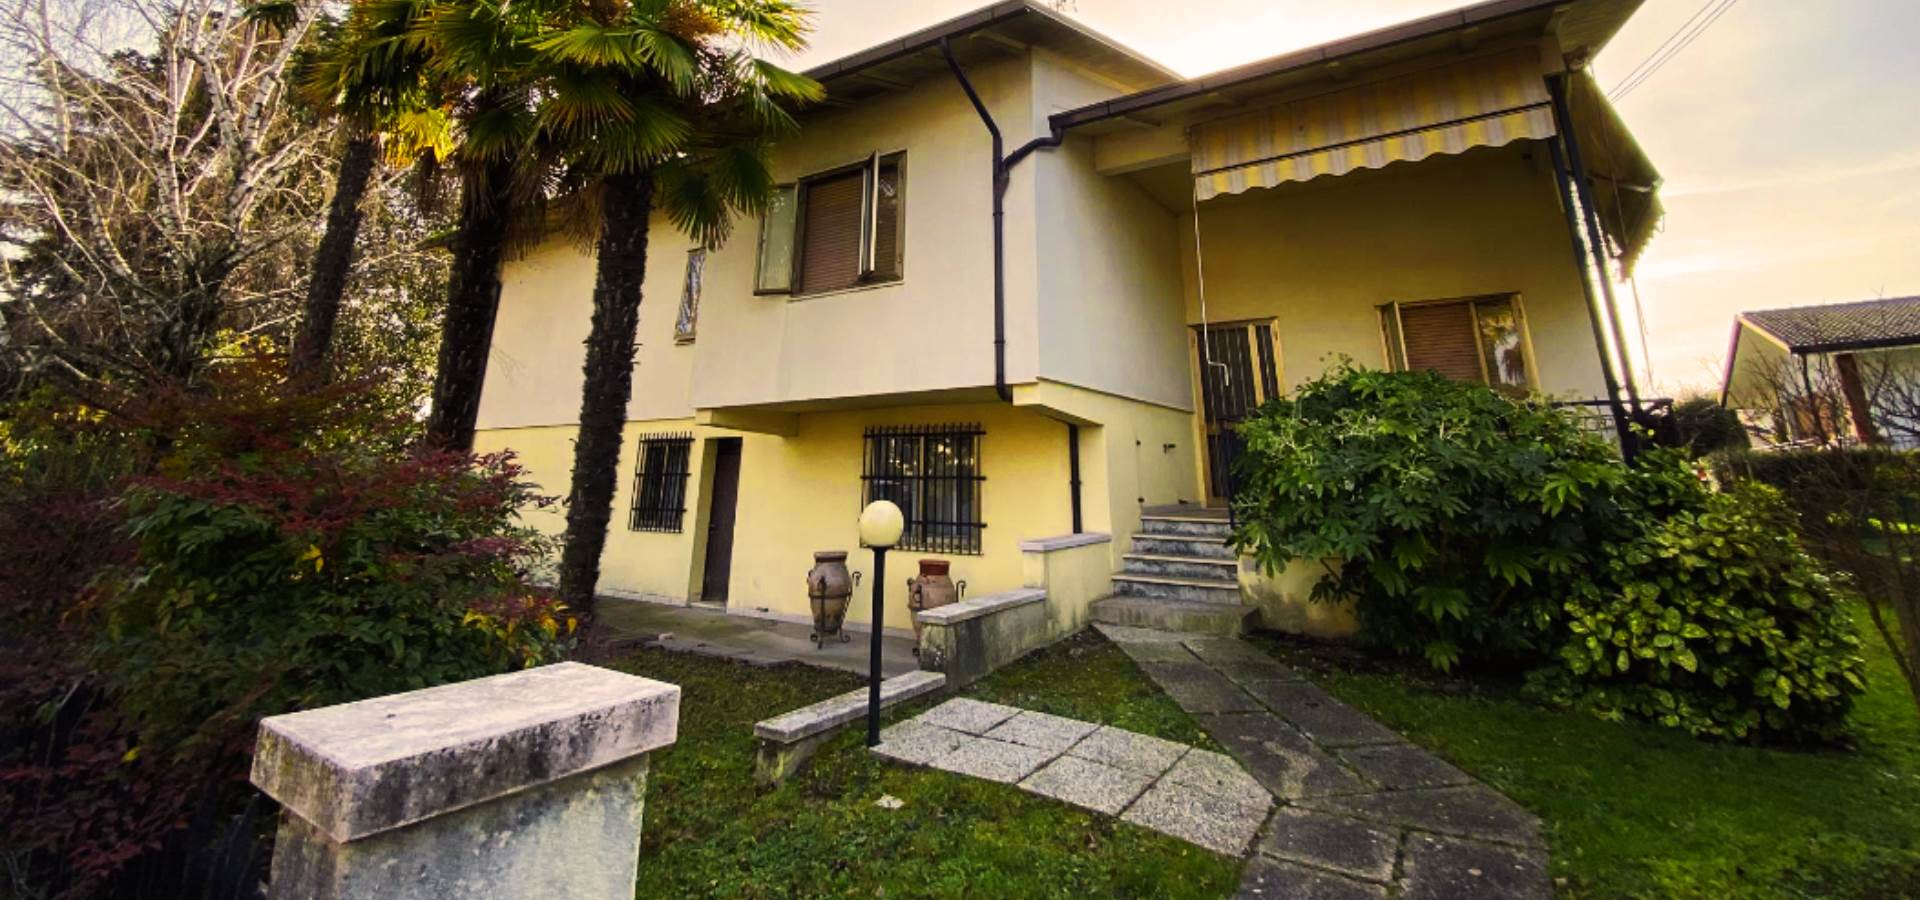 PORTOGRUARO, Villa for sale of 154 Sq. mt., Habitable, Heating Individual heating system, Energetic class: E, placed at Raised, composed by: 10 Rooms, Separate kitchen, , 5 Bedrooms, 2 Bathrooms, 